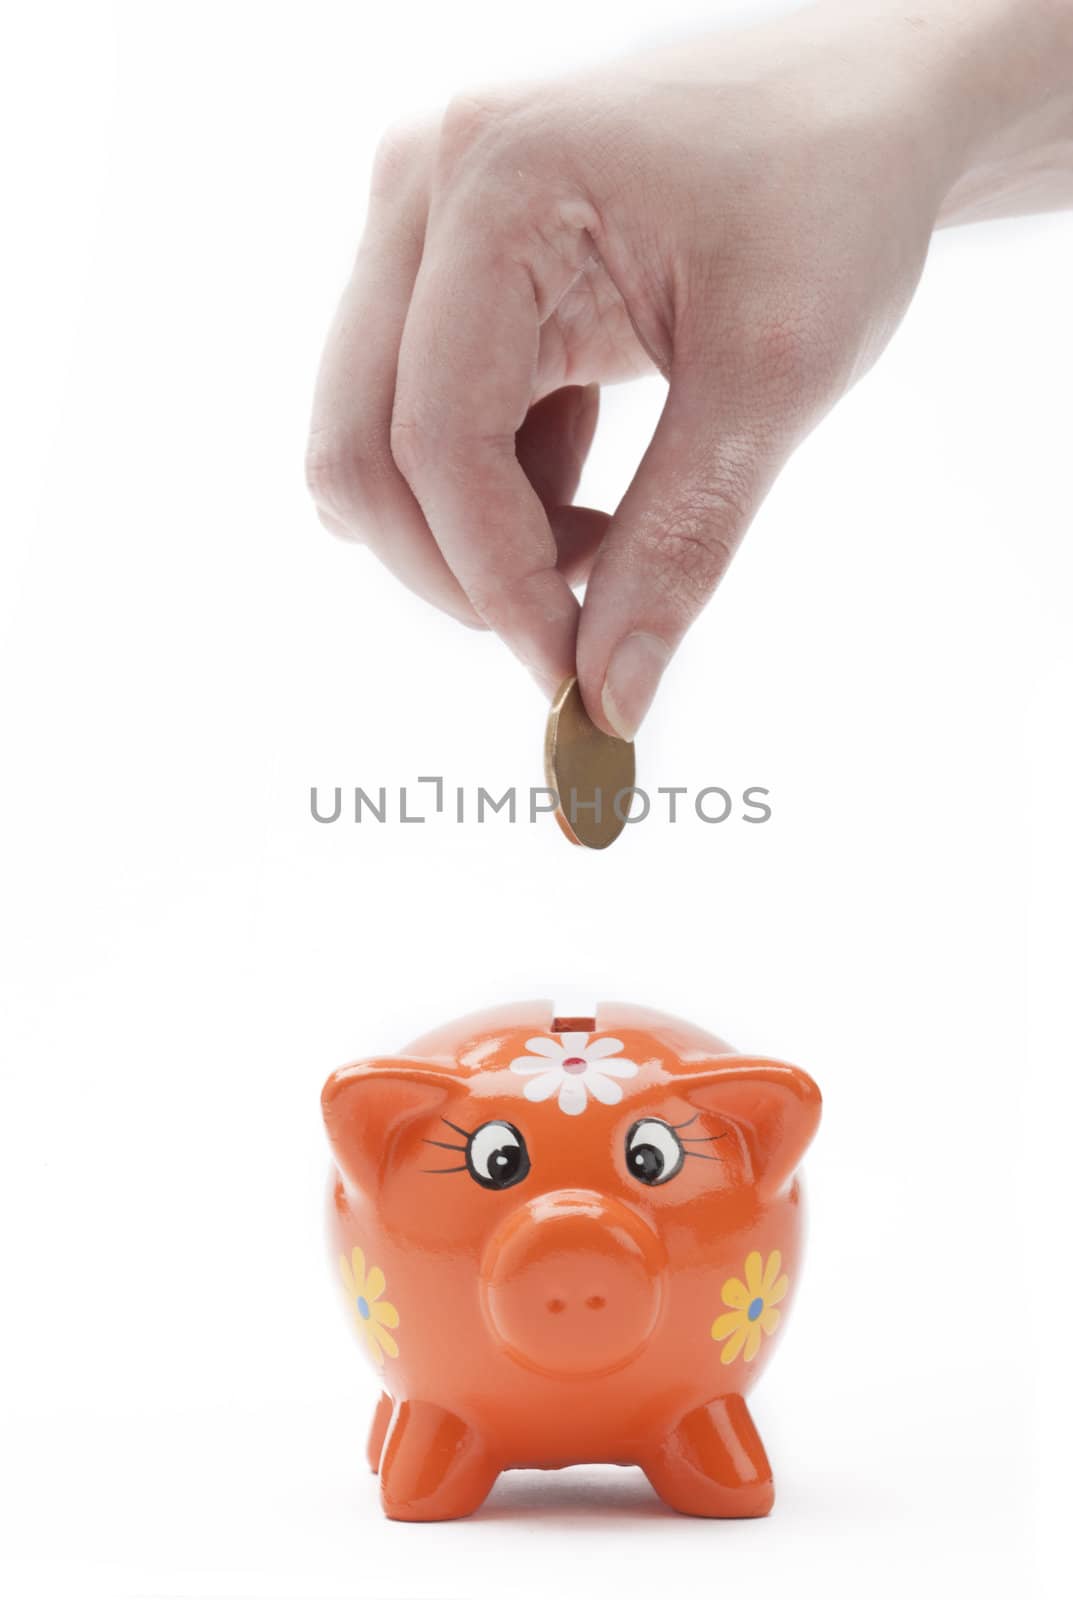 Someone putting coins into an orange piggy bank